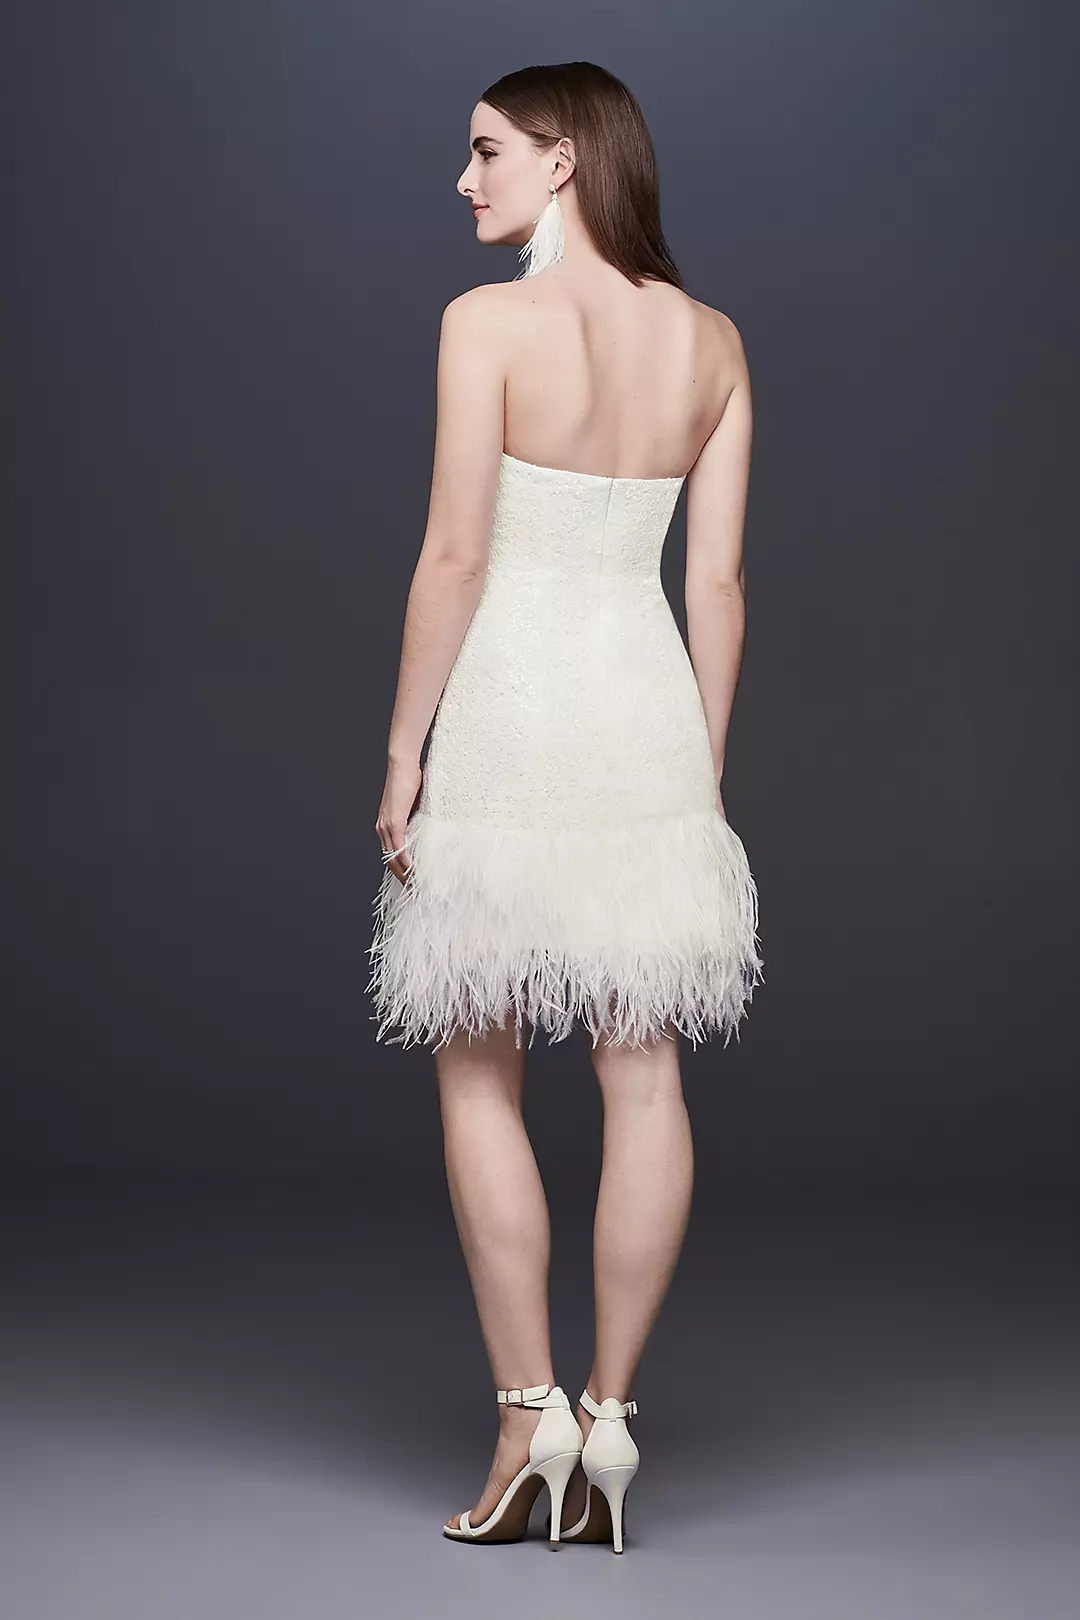 Buy Lace Ostrich Feather Dresses Online Shopping at